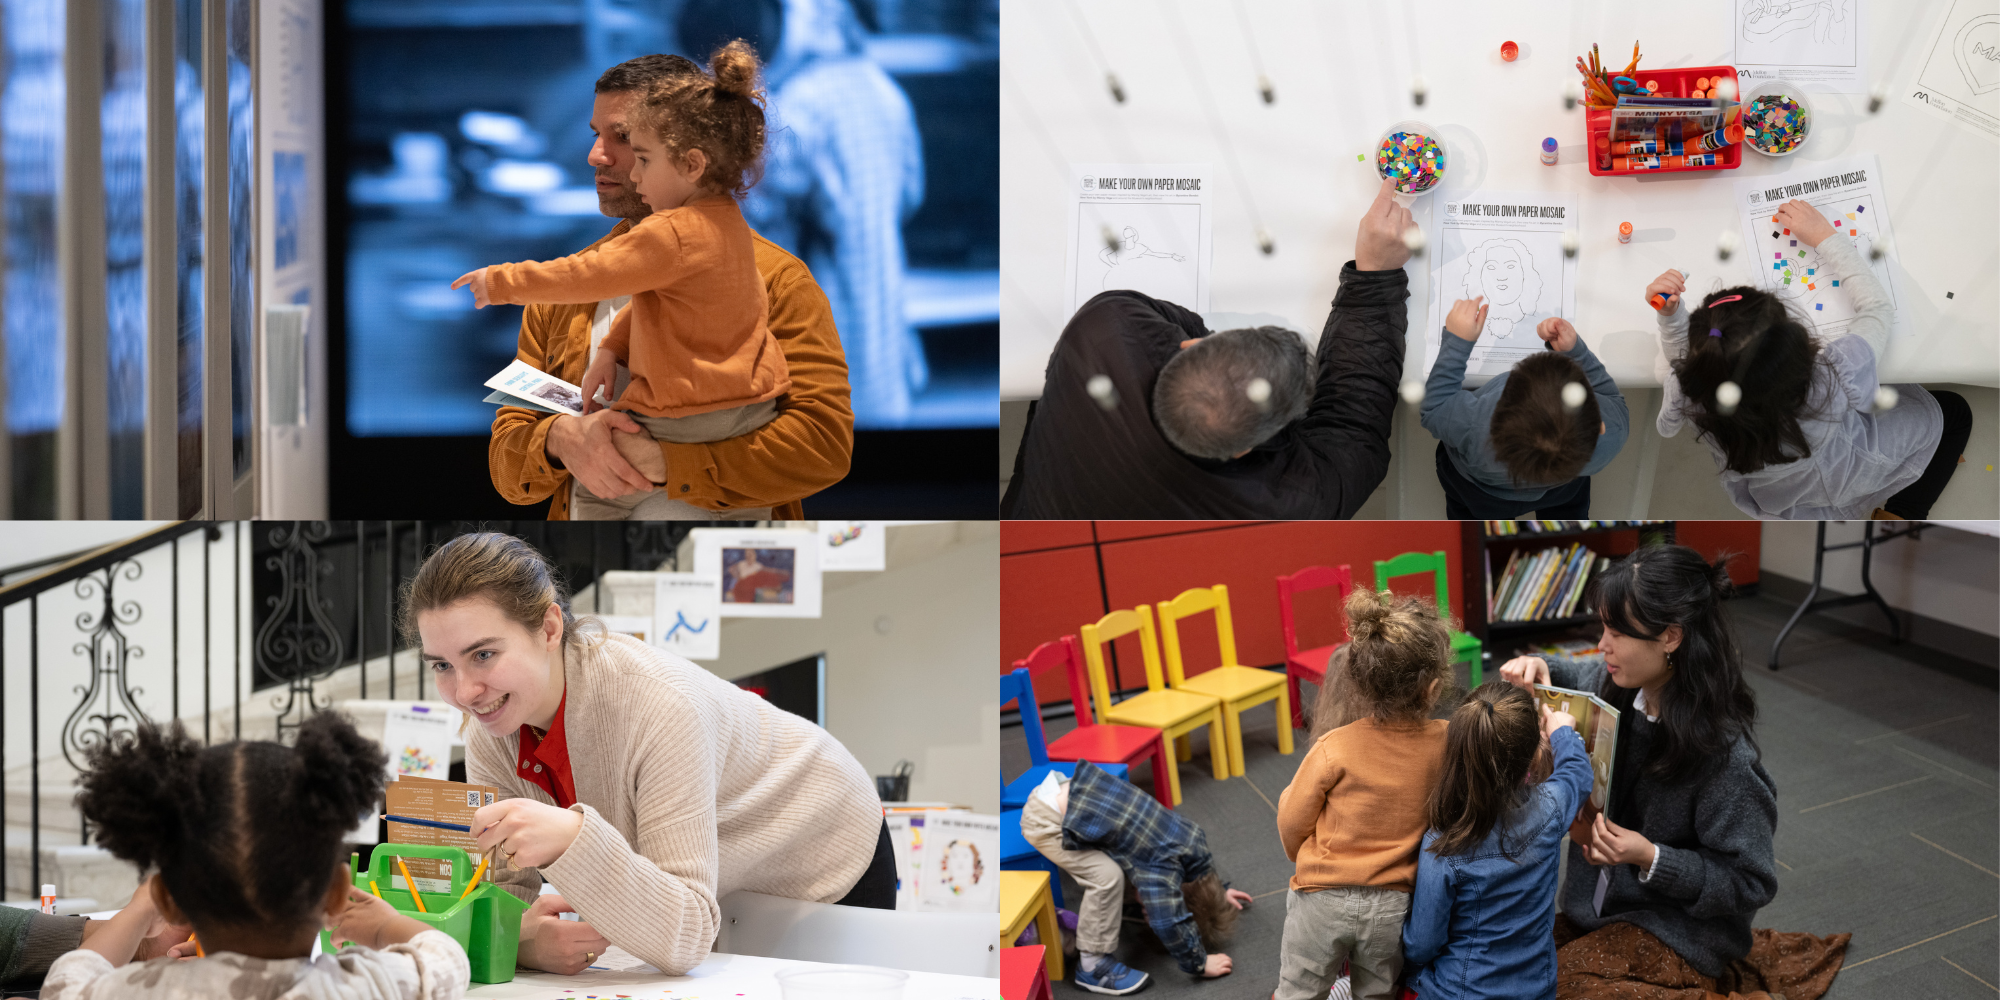 Photo collage: [Bottom Right] A man holds a toddler as they look at paintings. [Bottom Left] A woman smiles at a small child making art. Top Right] A man and two small children draw at a table. [Bottom Right] An adult reads a book to a group of toddlers. [